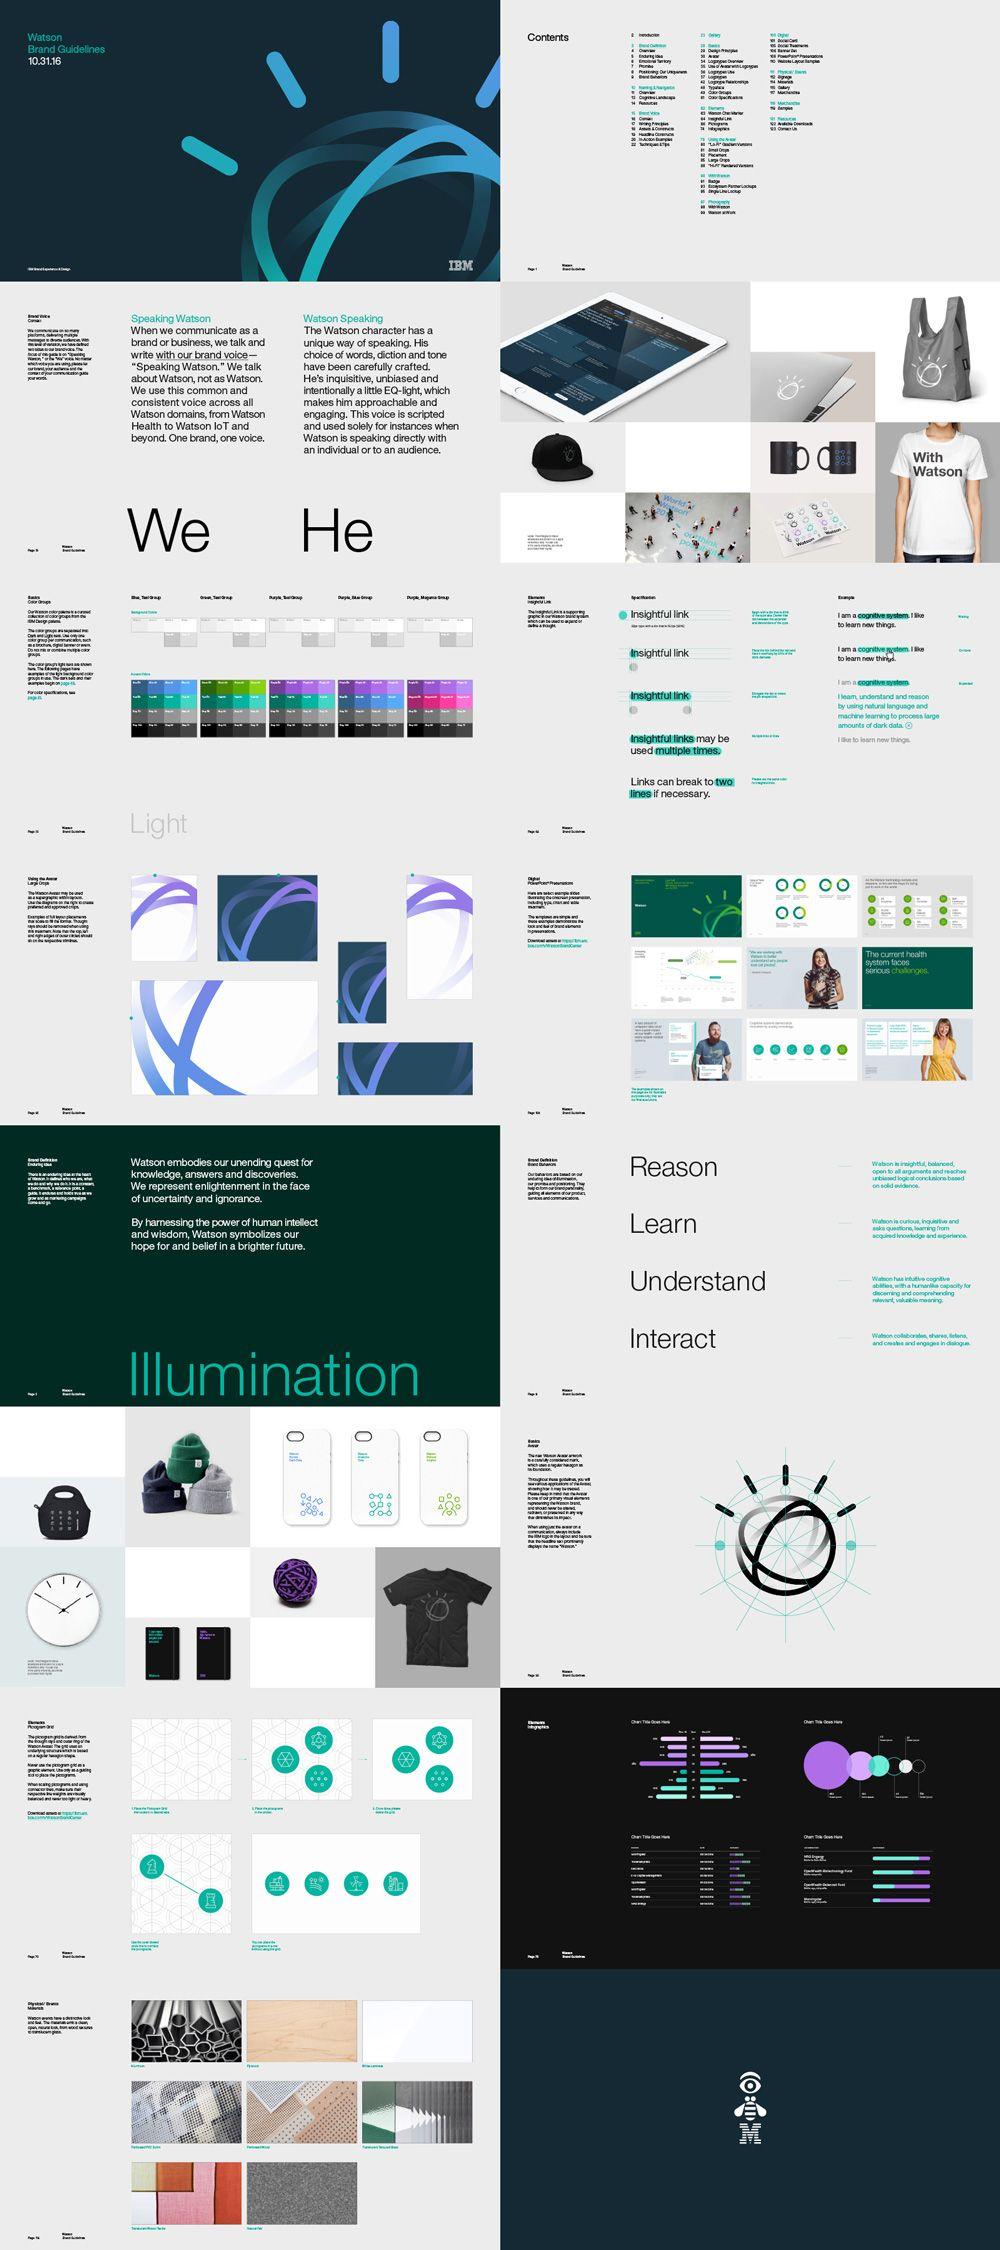 Use IBM Watson Logo - Brand New: New Logo and Identity for IBM Watson done In-house (with ...